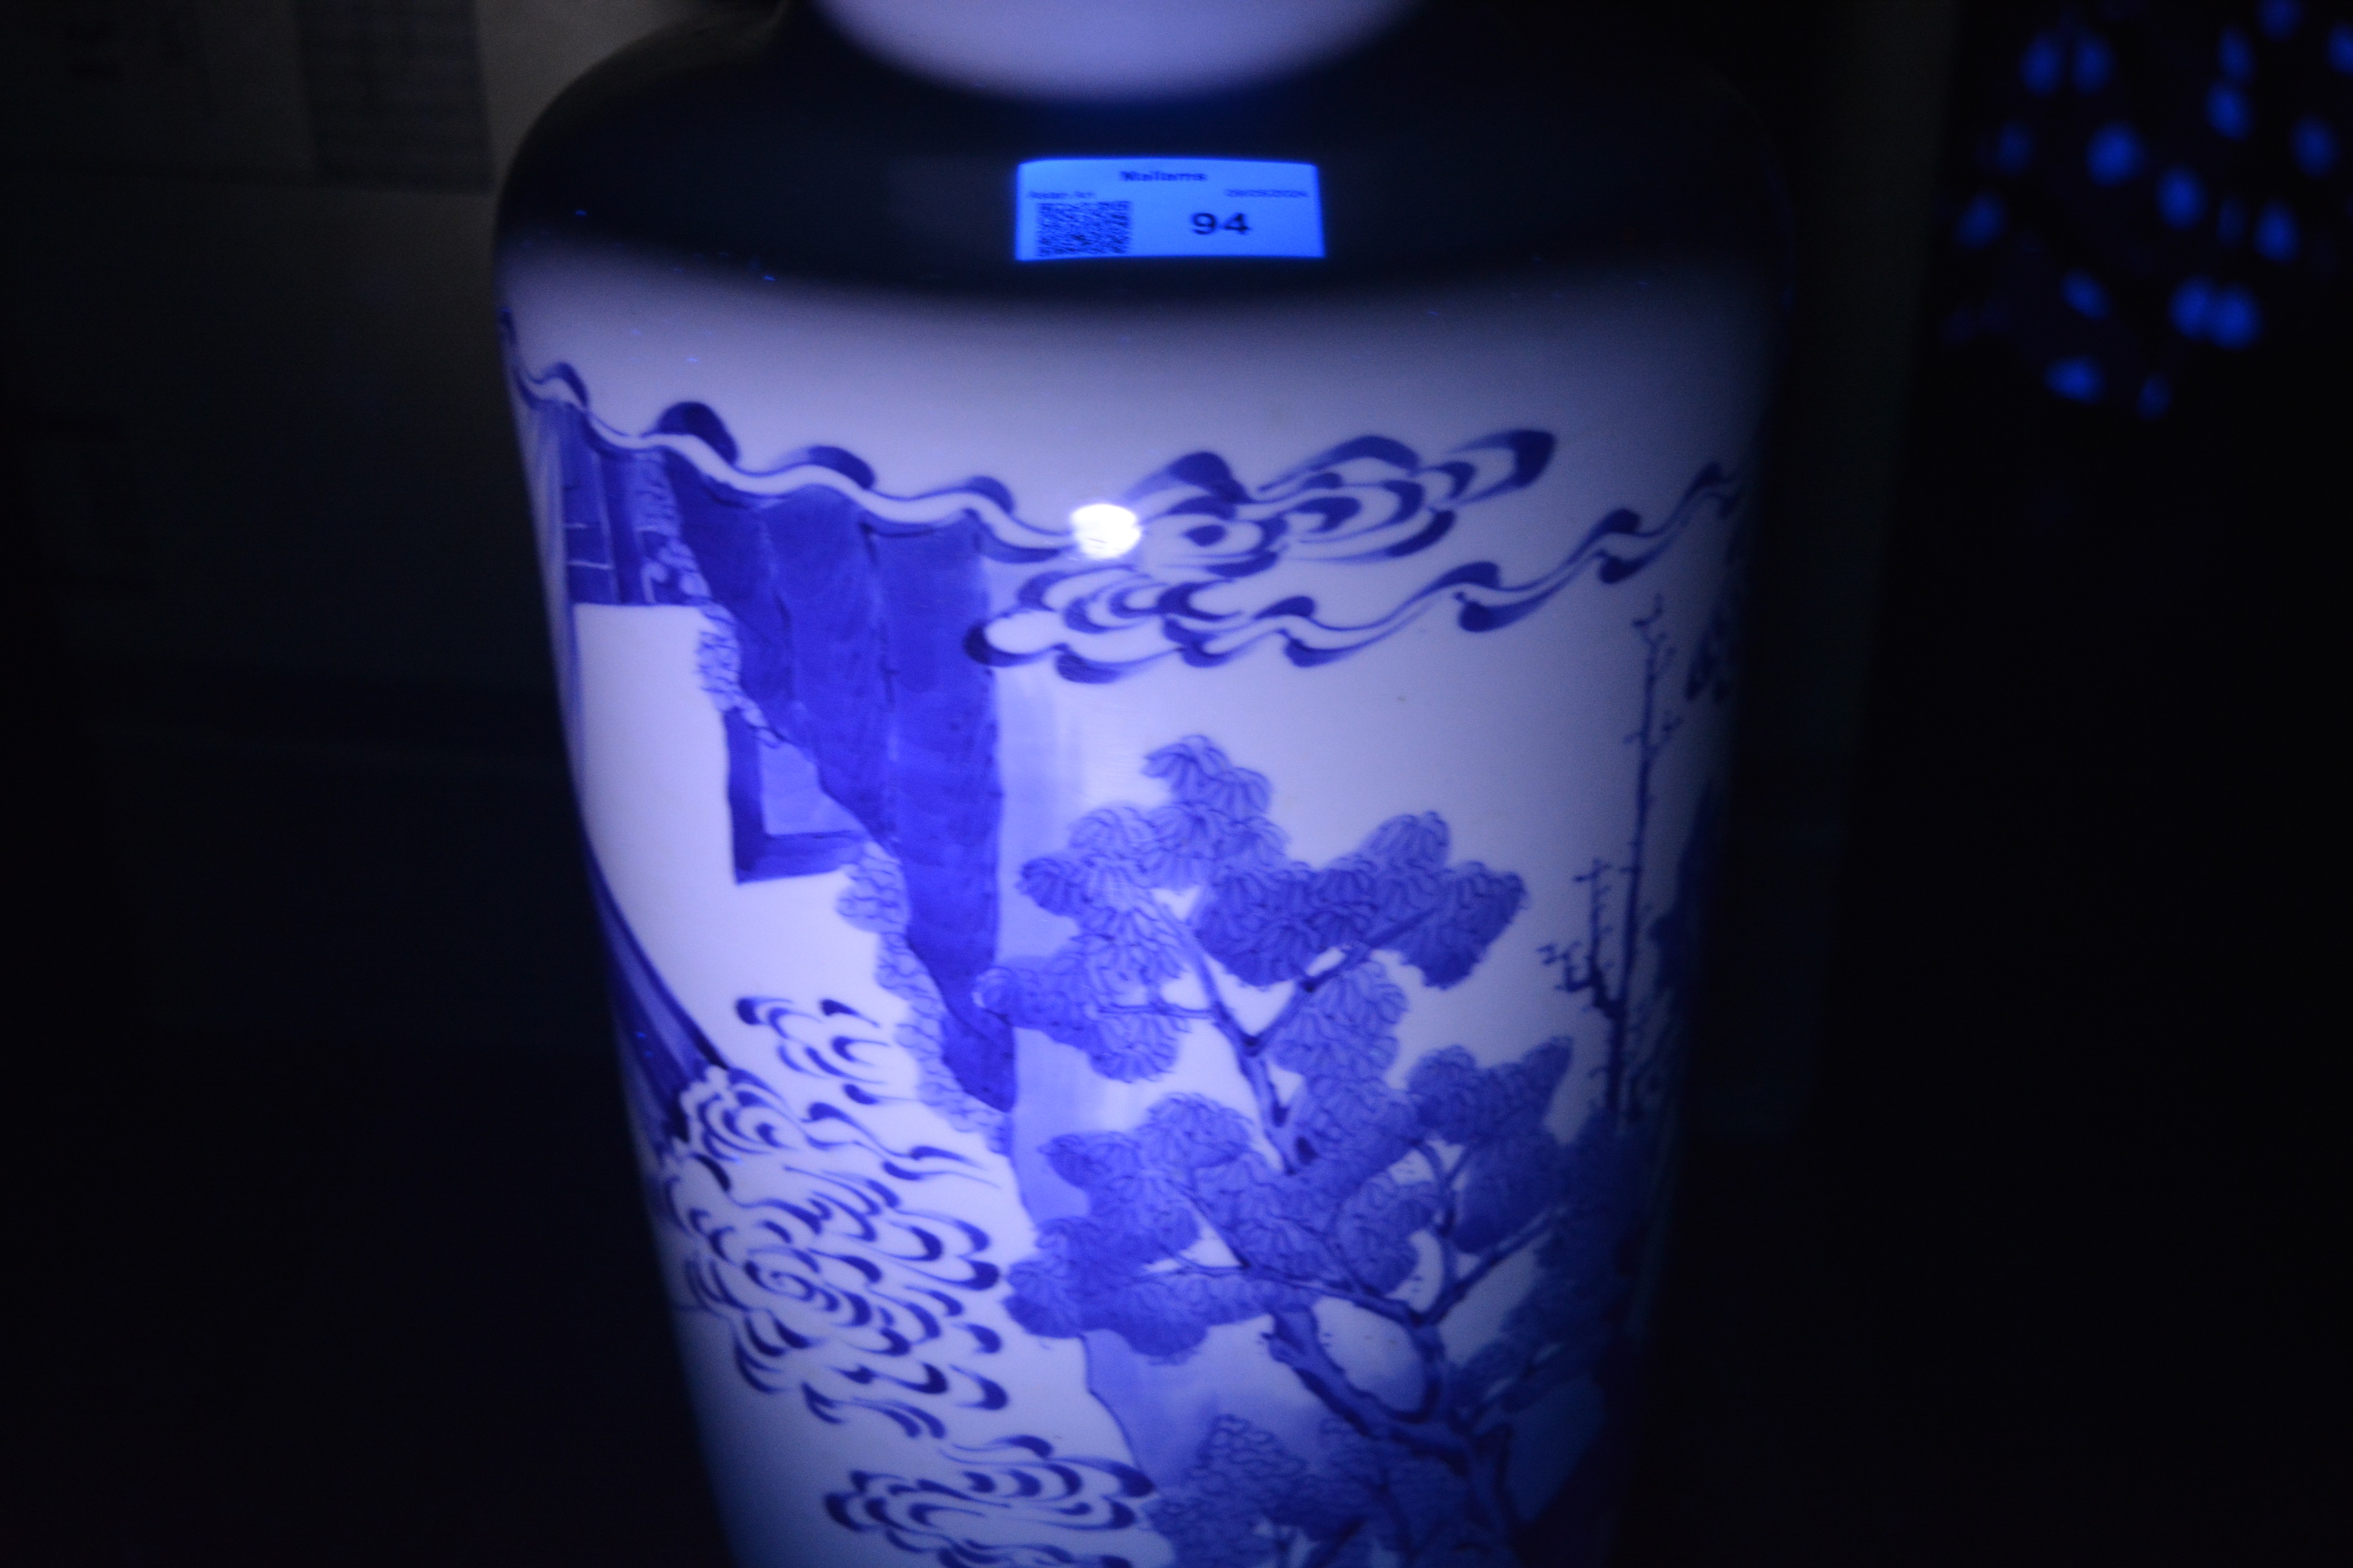 Blue and white porcelain rouleau vase Chinese, Kangxi painted with scholars, clouds, and figures - Image 31 of 33